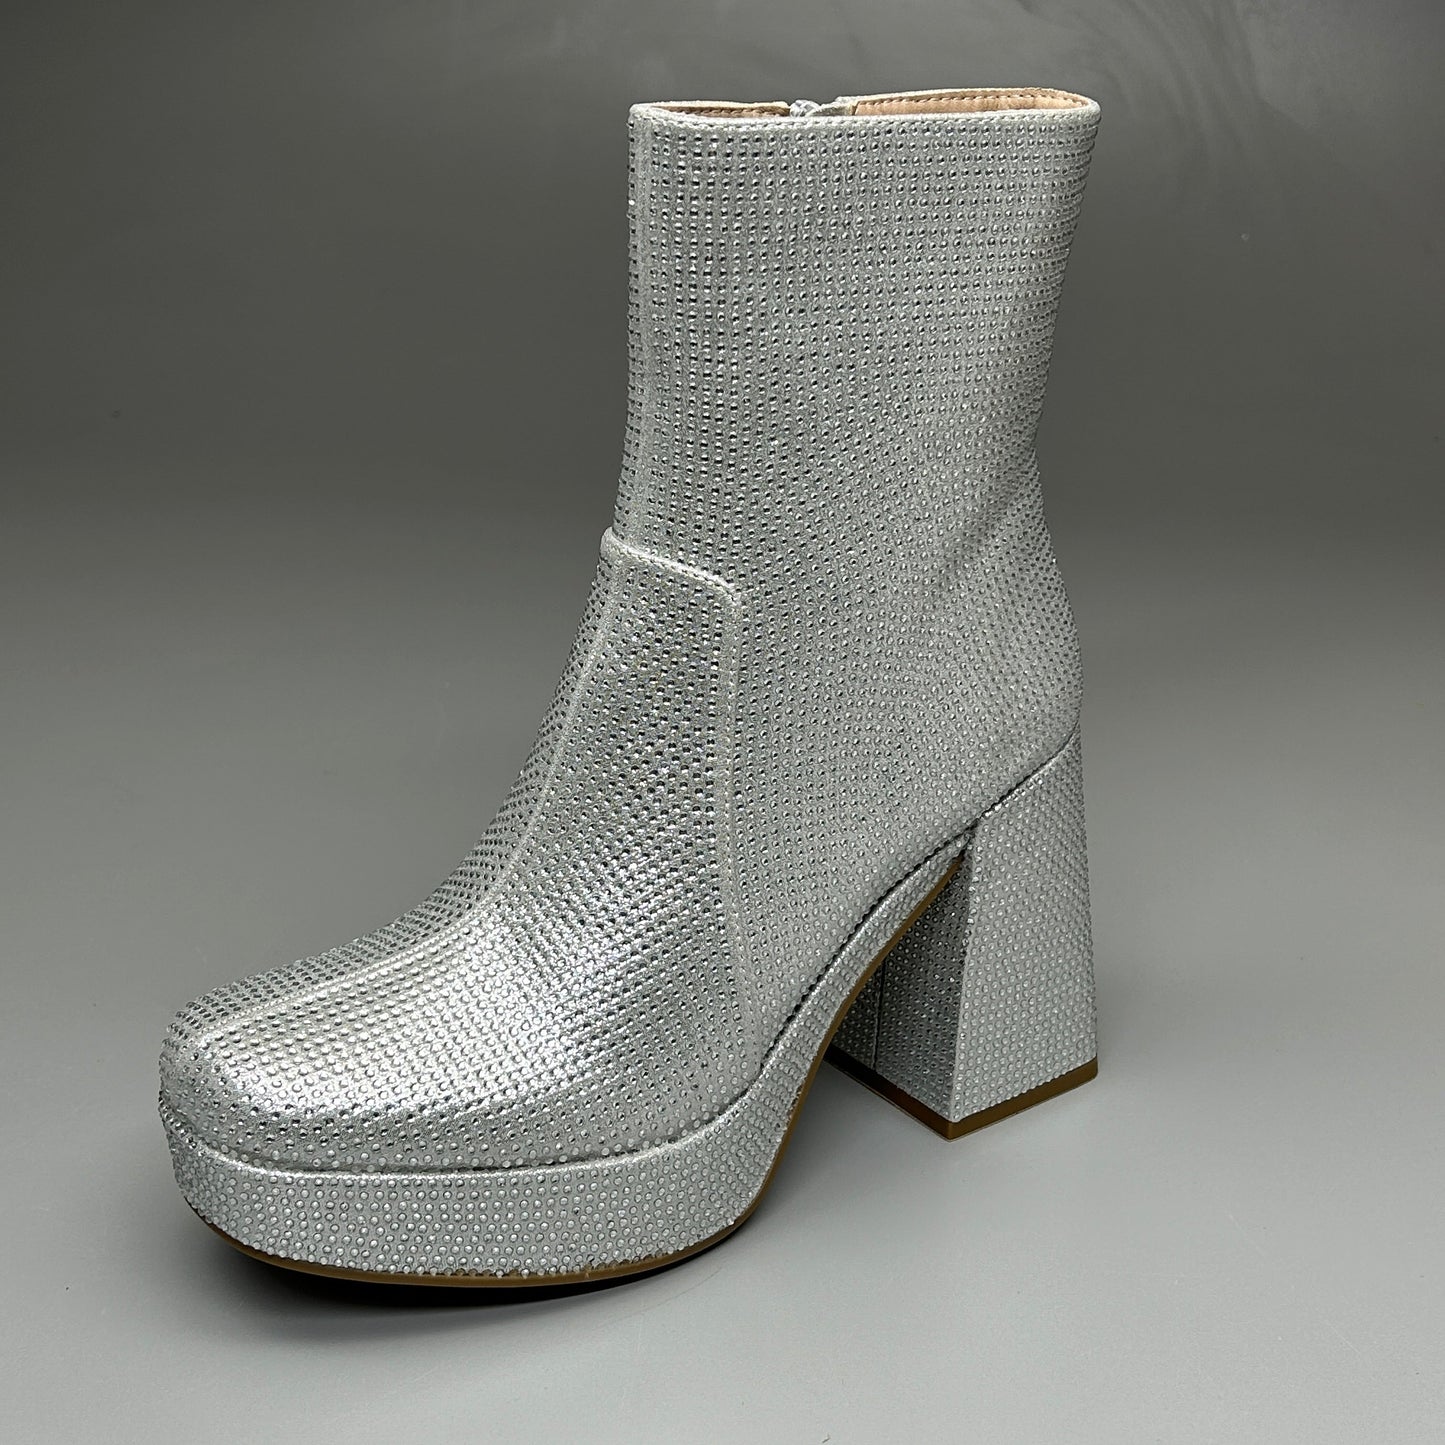 MIA Iva Silver Stone Heeled Boots Women's Sz 6 Silver GS1253108 (New)